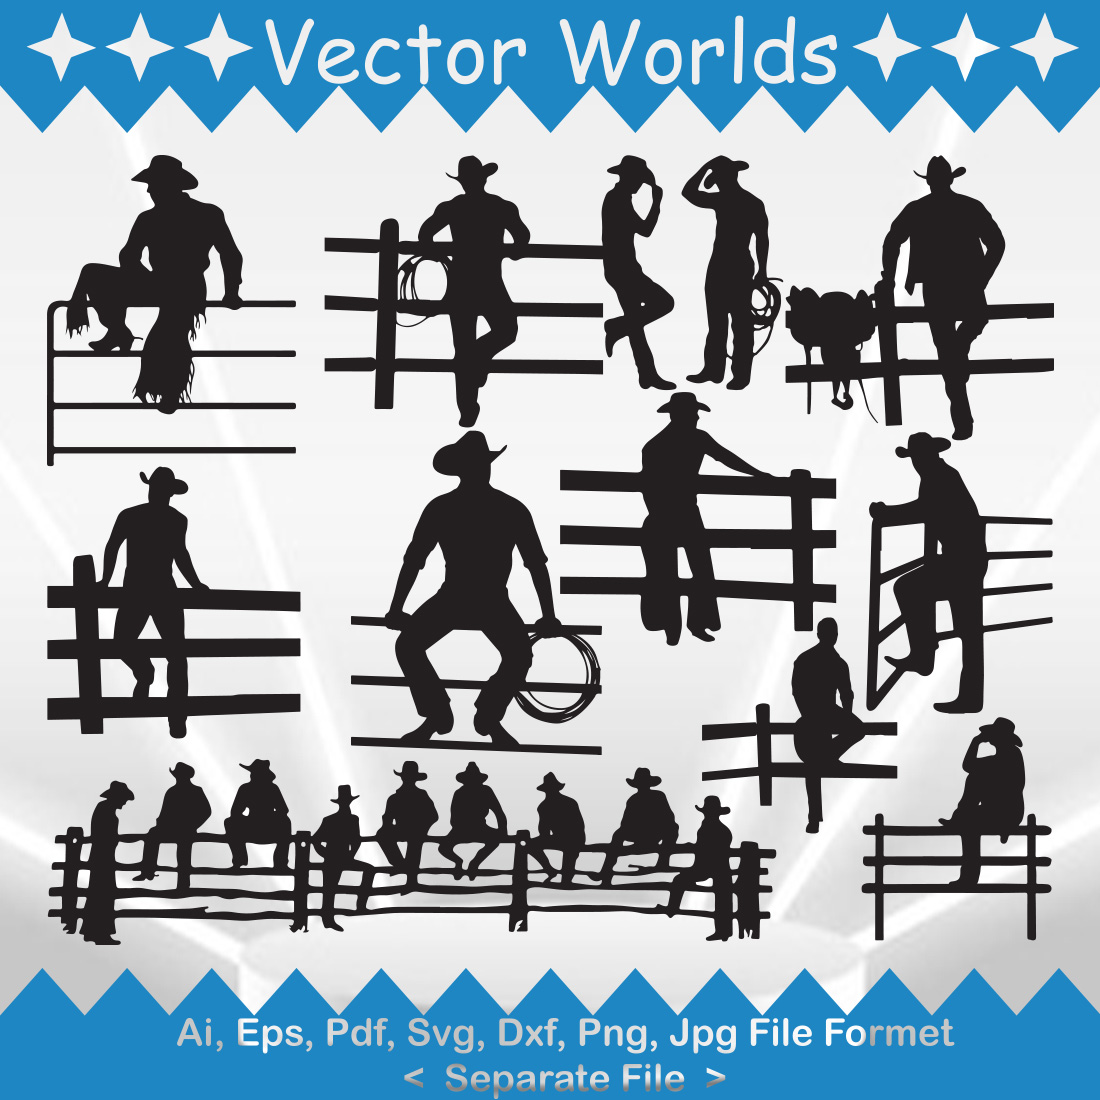 A selection of exquisite vector images of silhouettes of cowboys near the fence